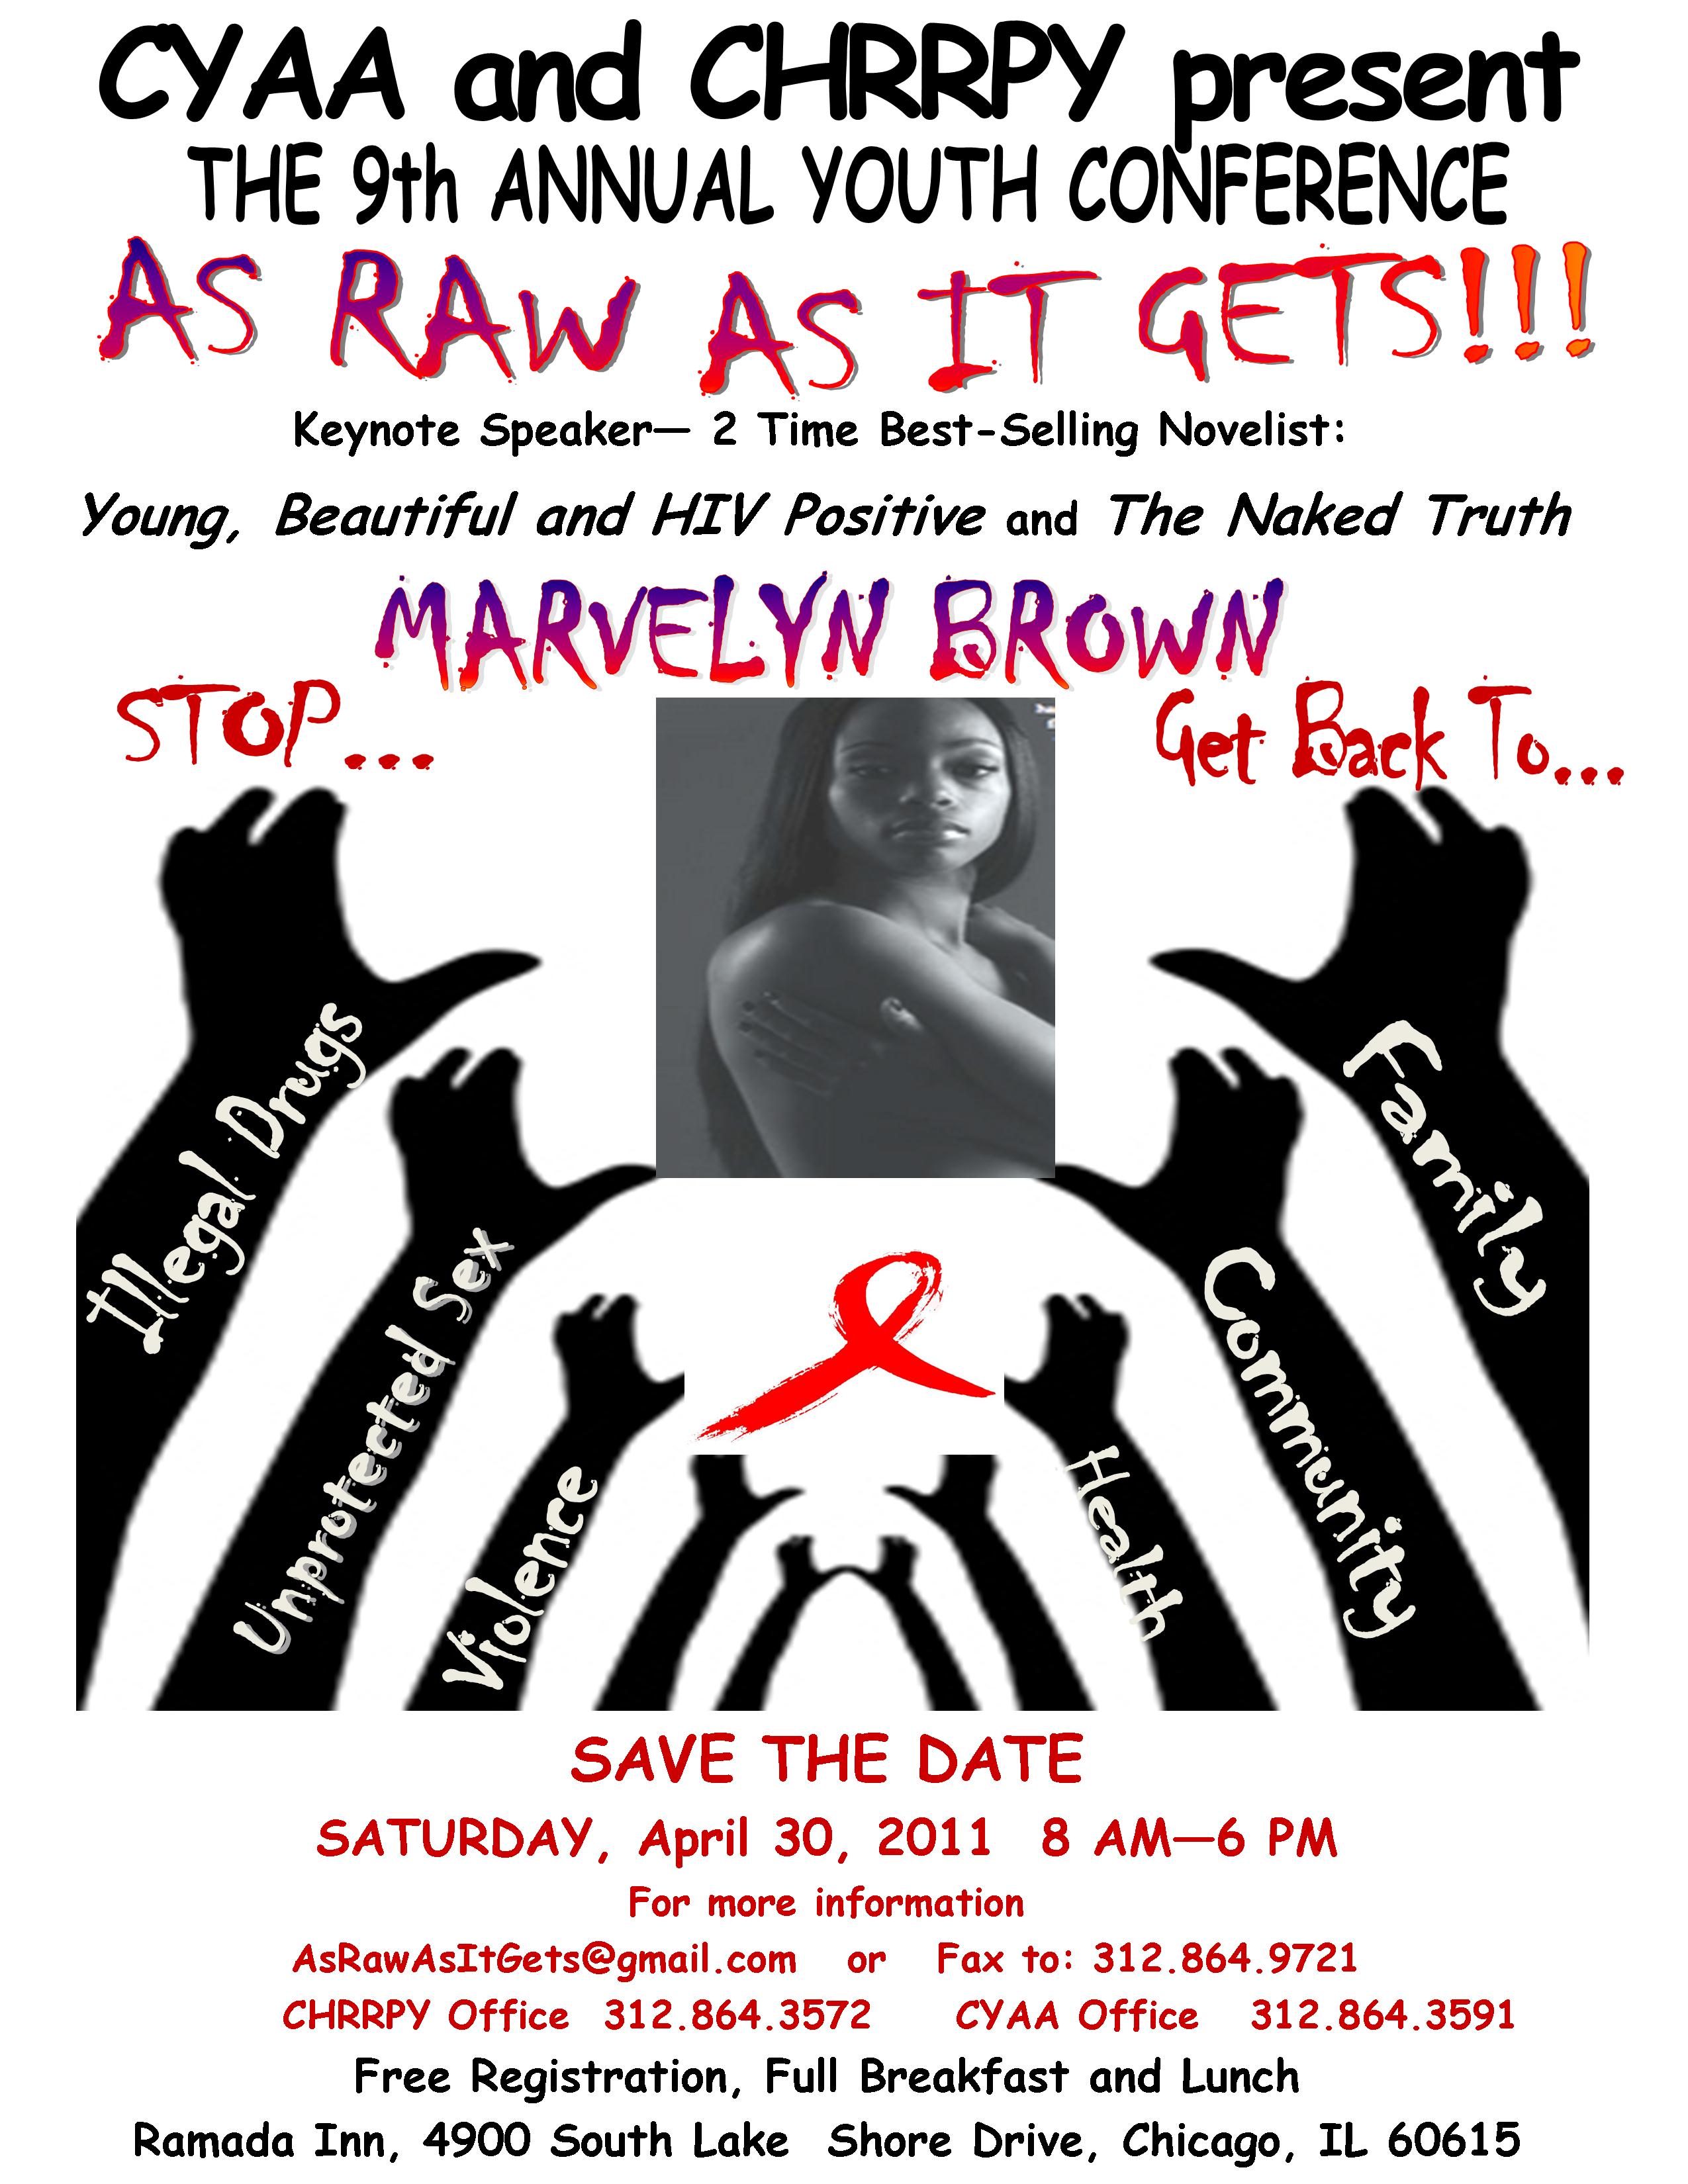 Save the Date - As Raw As It Gets